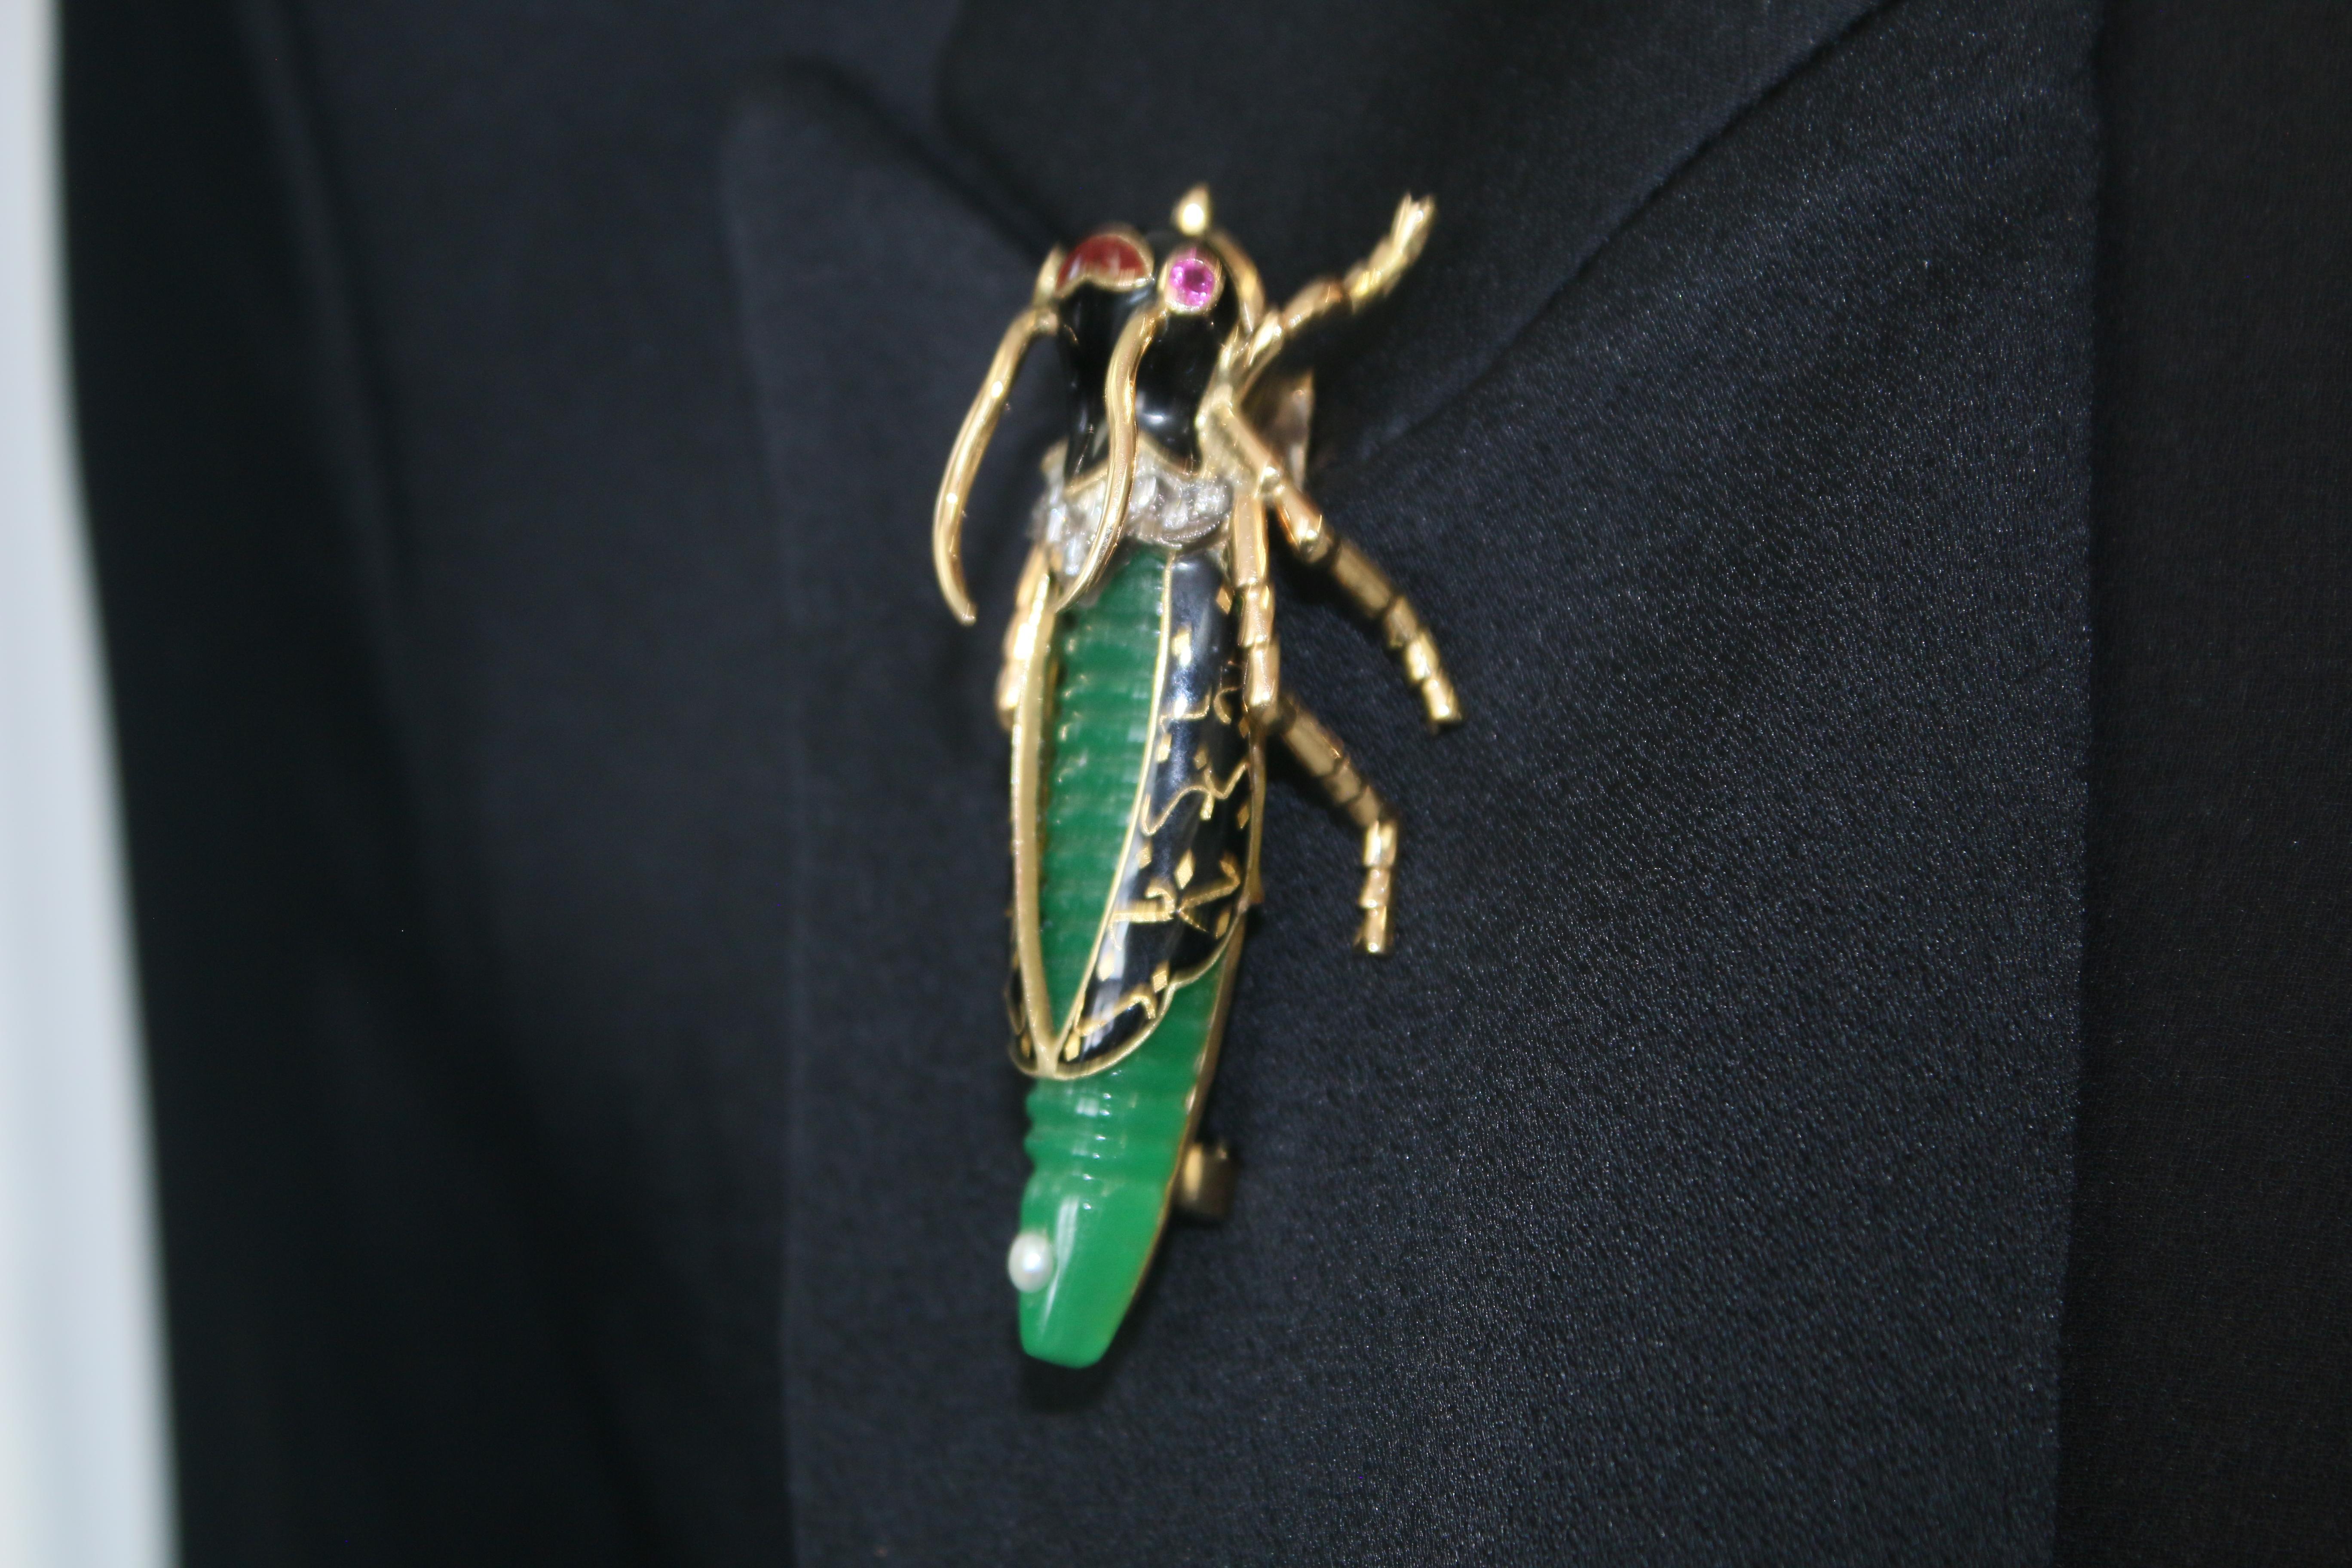 Introducing our Green Body Bug Pin, a unique and charming accessory that adds a touch of whimsy and elegance to your attire. This delightful bug pin features a vibrant green body and intricate detailing, meticulously crafted to adorn your clothing